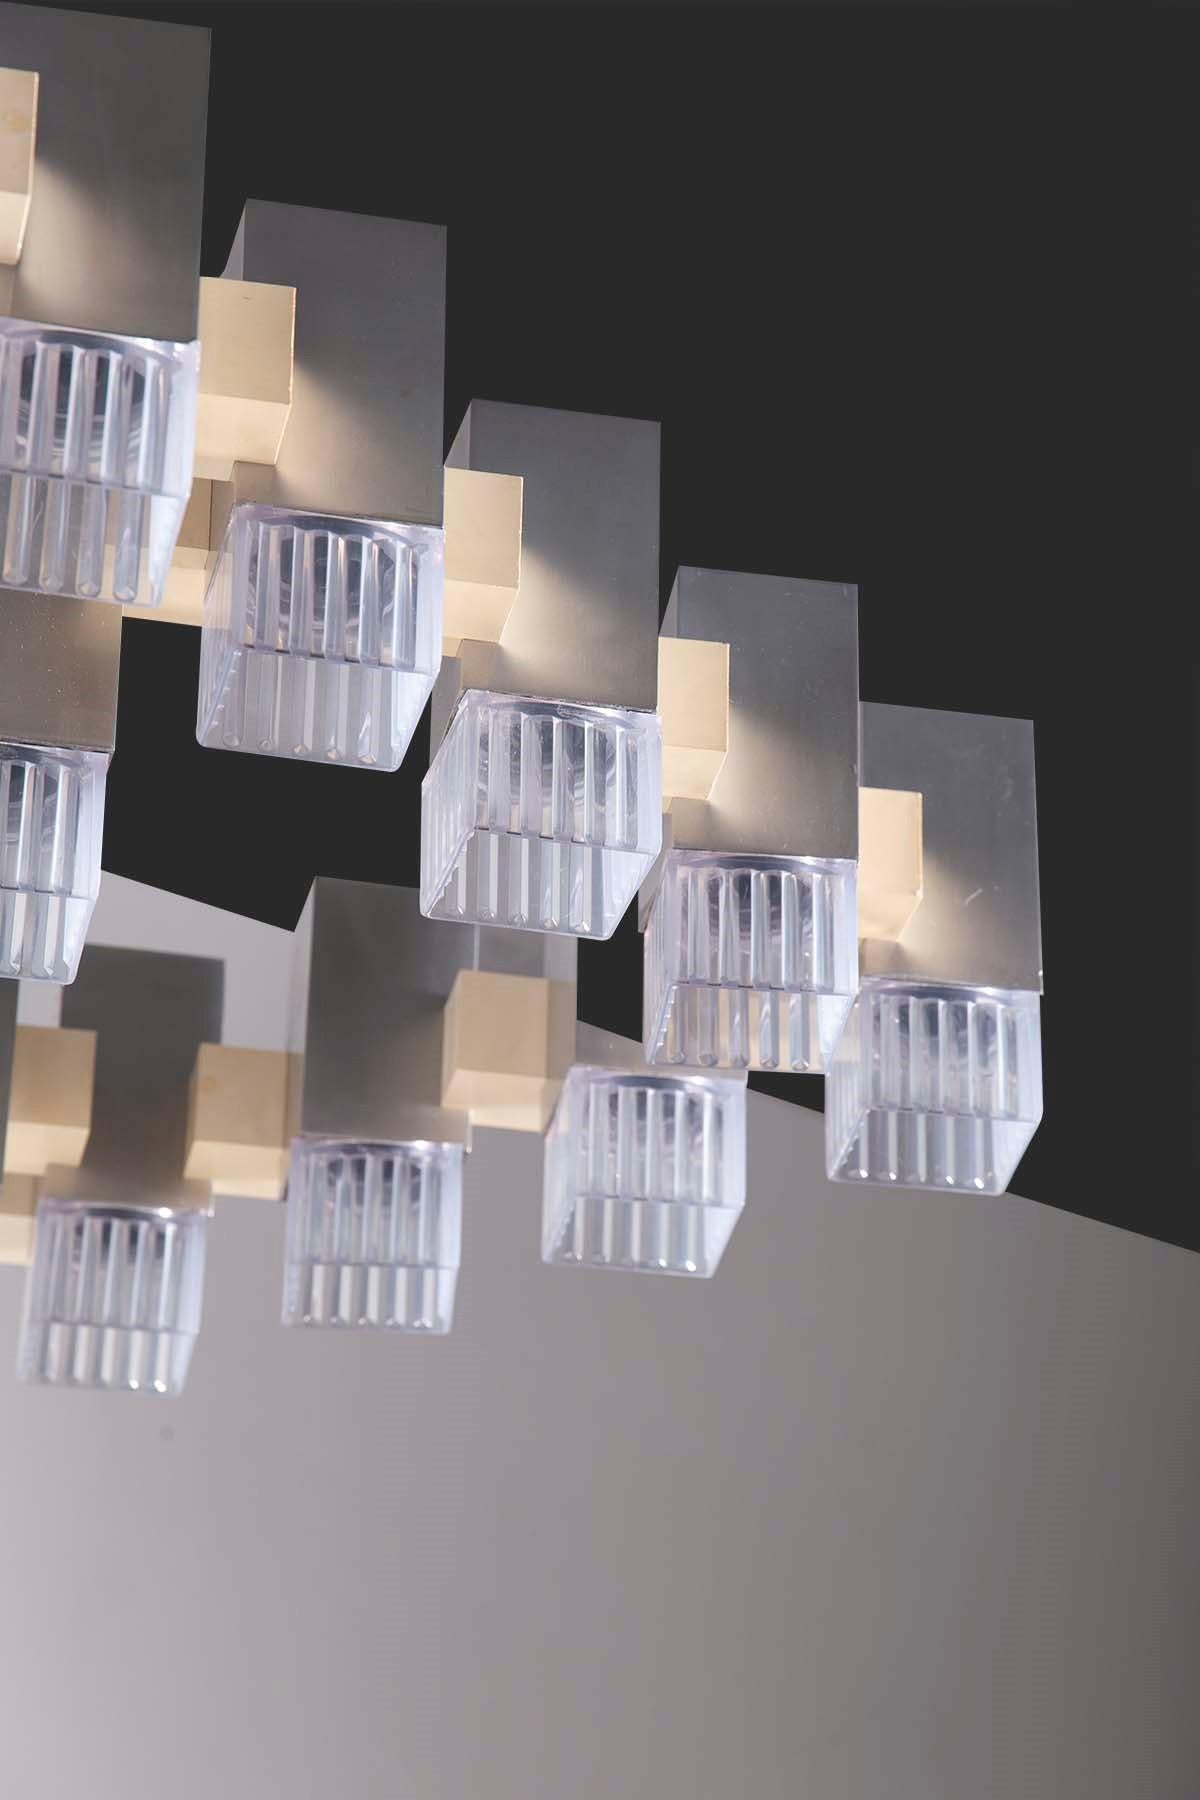 Chandelier designed by Gaetano Sciolari. This chandelier consists of 32 rectangular cubes in polished chrome with textured lucite lampshades. C1970s